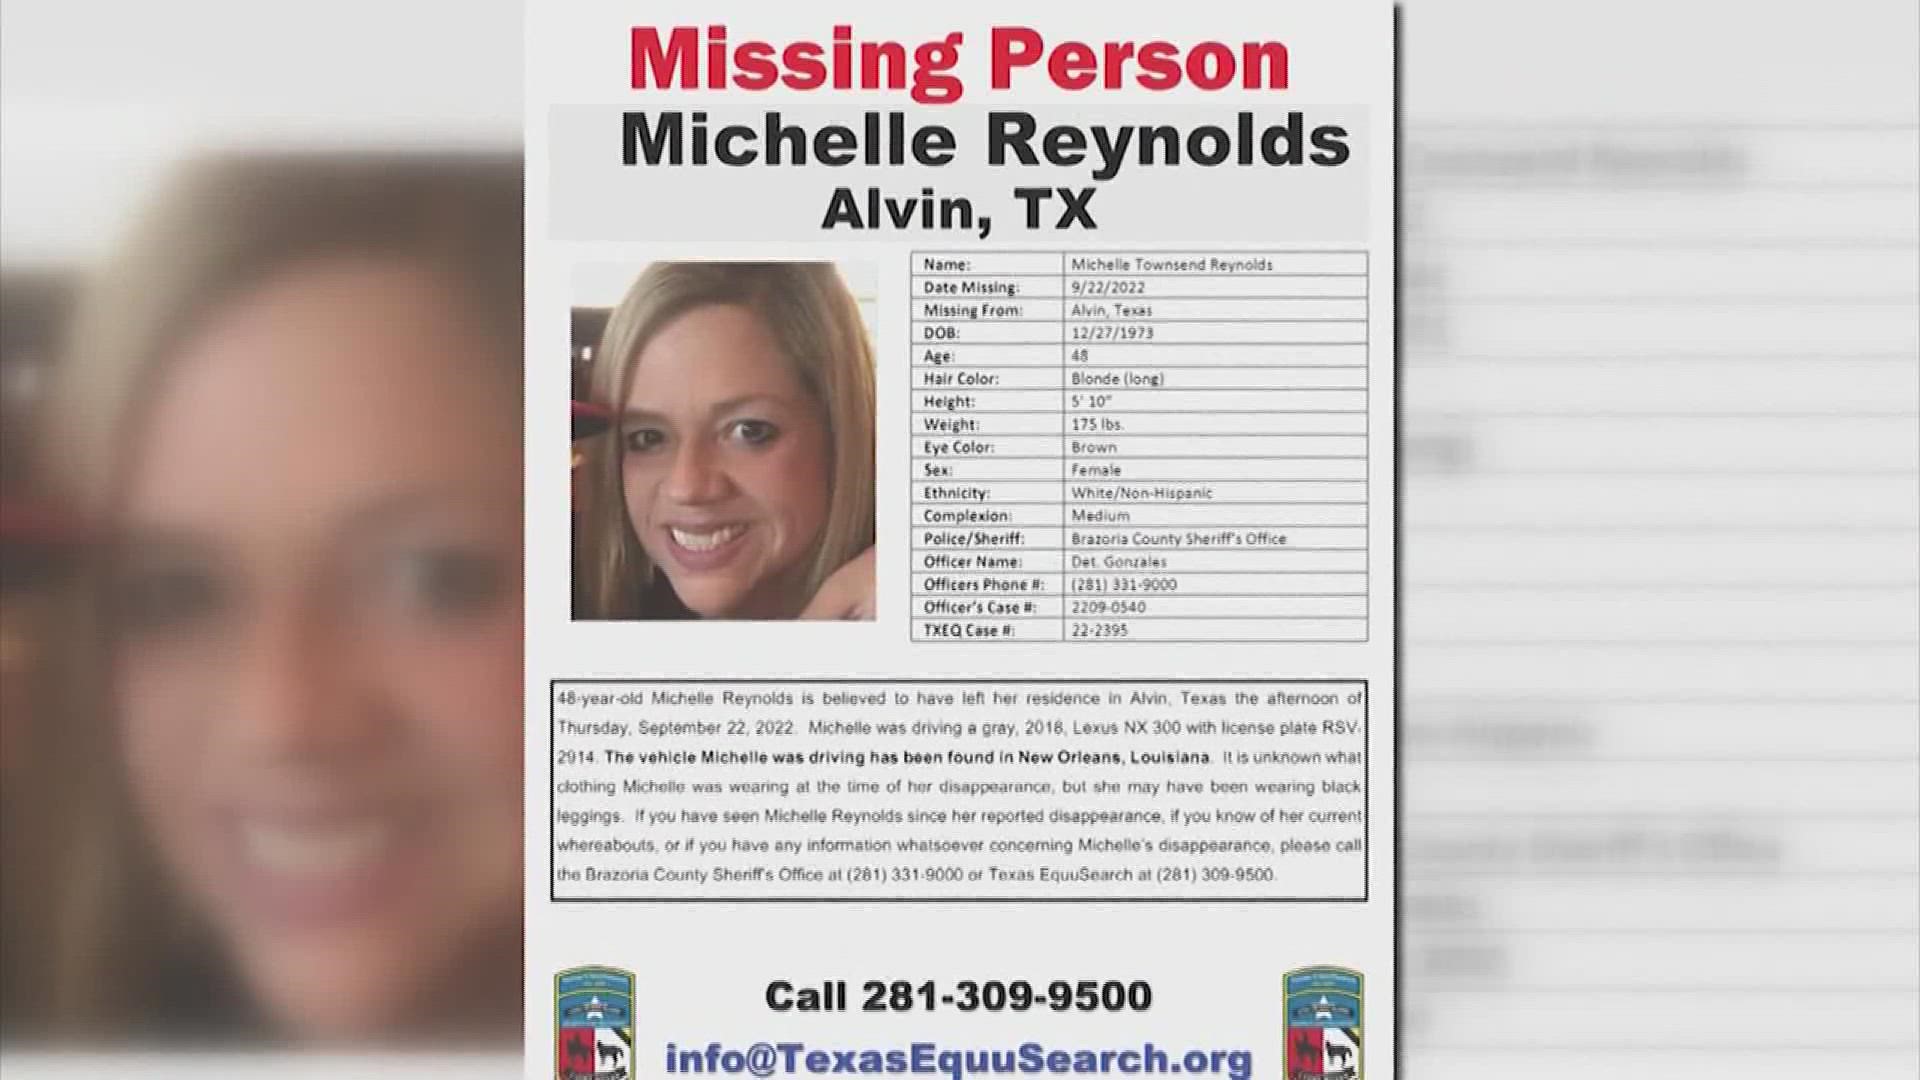 12News spoke with the husband of a missing woman from Alvin who has ties to orange. 48-year-old Michelle Reynolds has been missing since September 22.